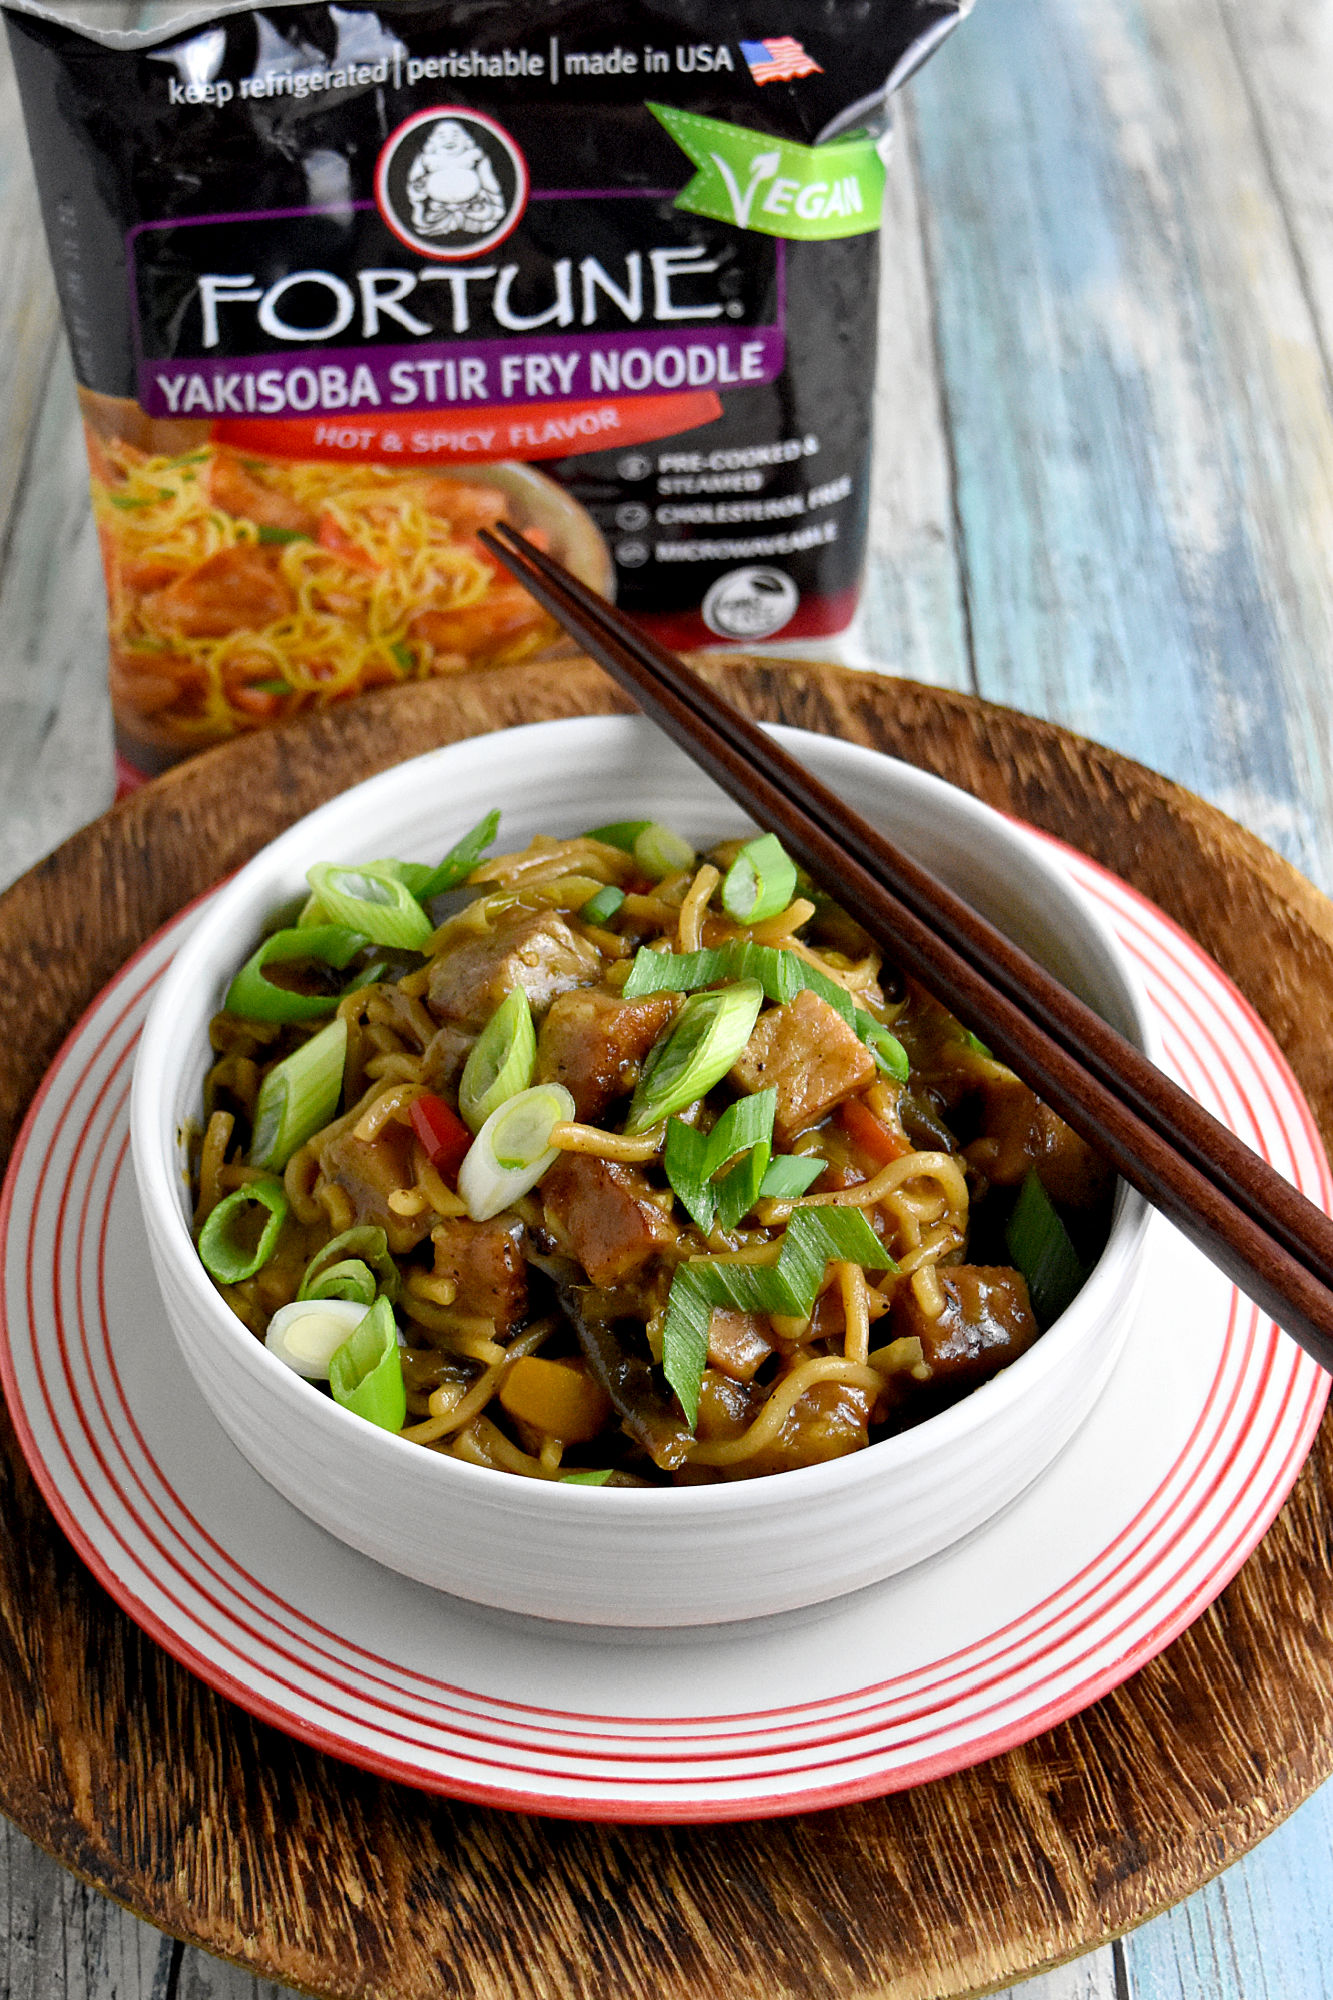 Pork and Noodle Stir Fry is a quick an easy dinner on the table super quick. The Fortune noodles cook up quick and taste hearty and delicious in this simple stir fry. #cooklikeawokstar #norulestostirfry #fortunerecipechallenge